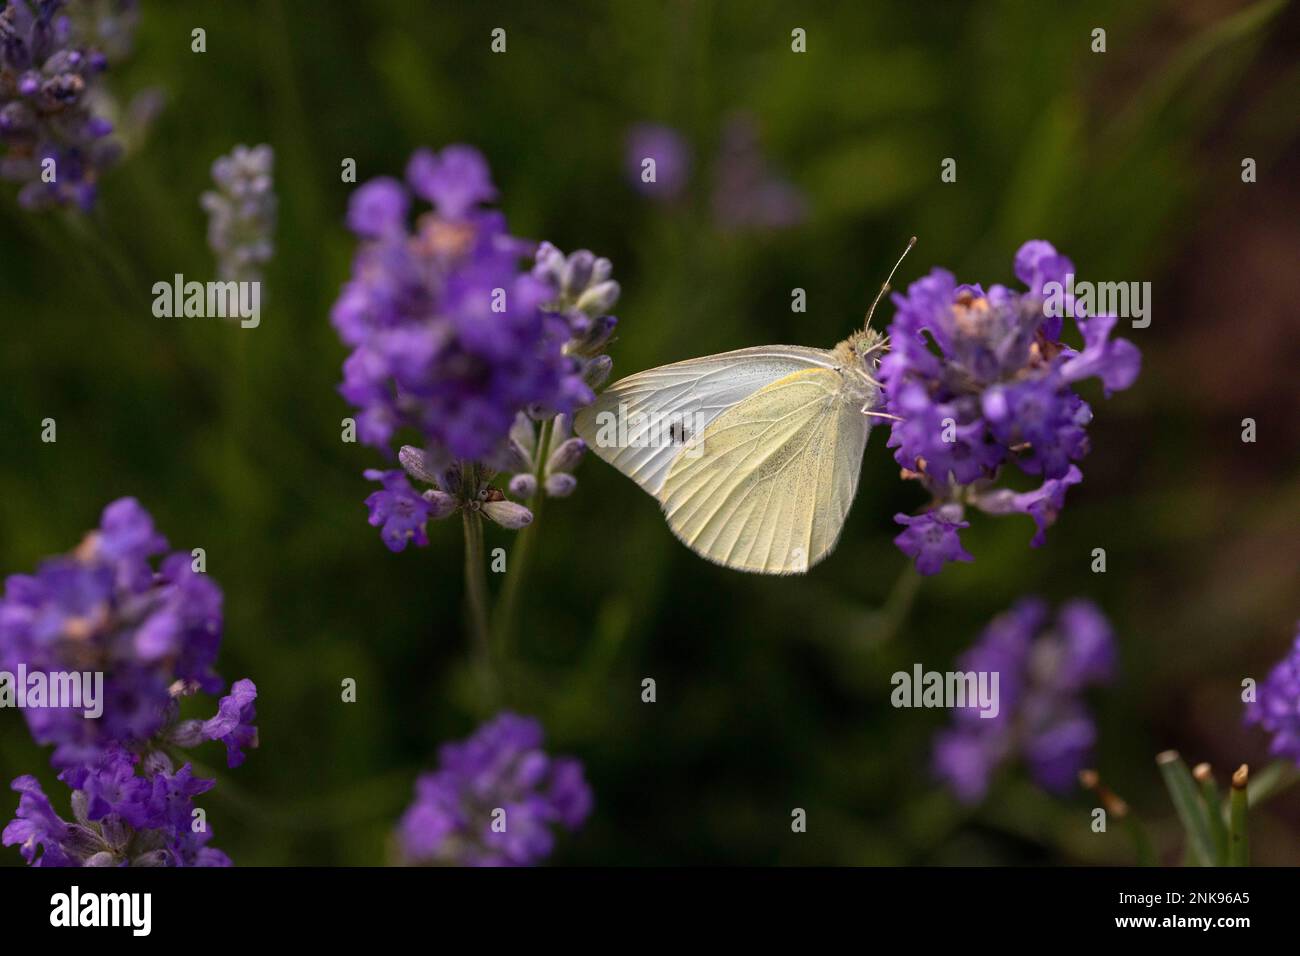 Cabbage White butterfly on a catmint plant Stock Photo